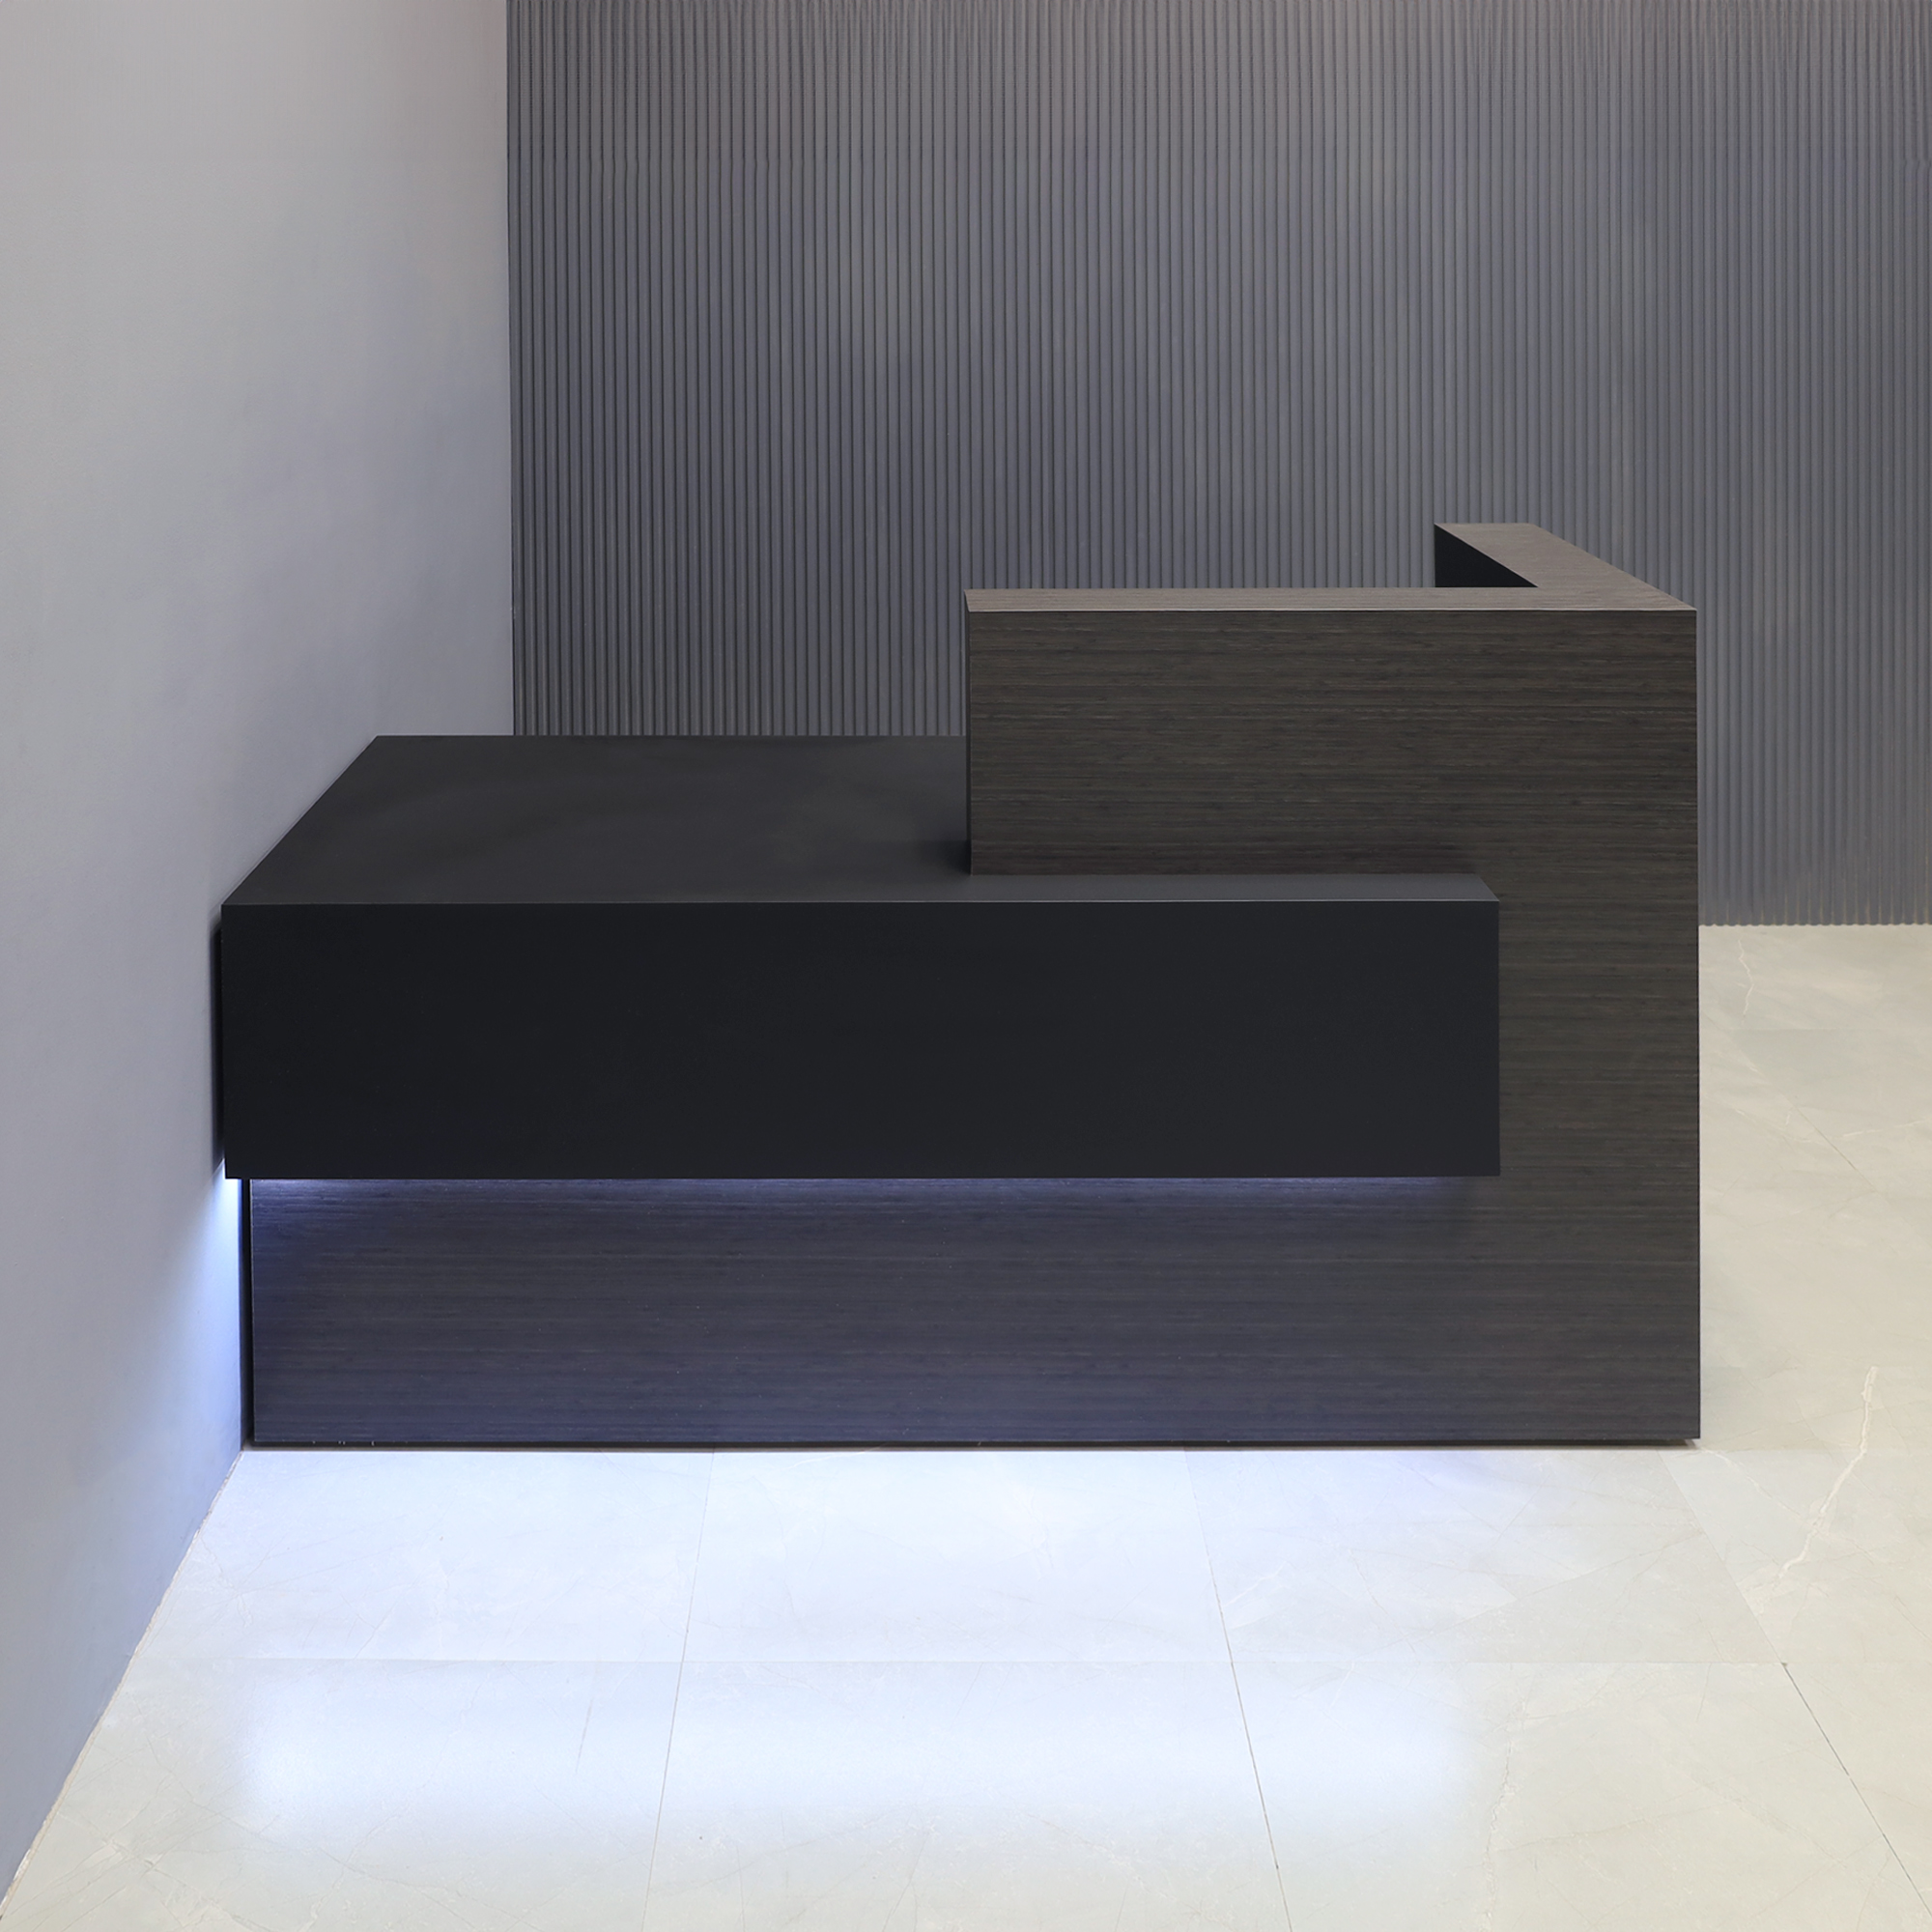 72-inch Atlanta Reception Desk, right countertop side when facing front in asian nights matte laminate and workspace & front accent in black traceless laminate, with warm white LED, shown here.